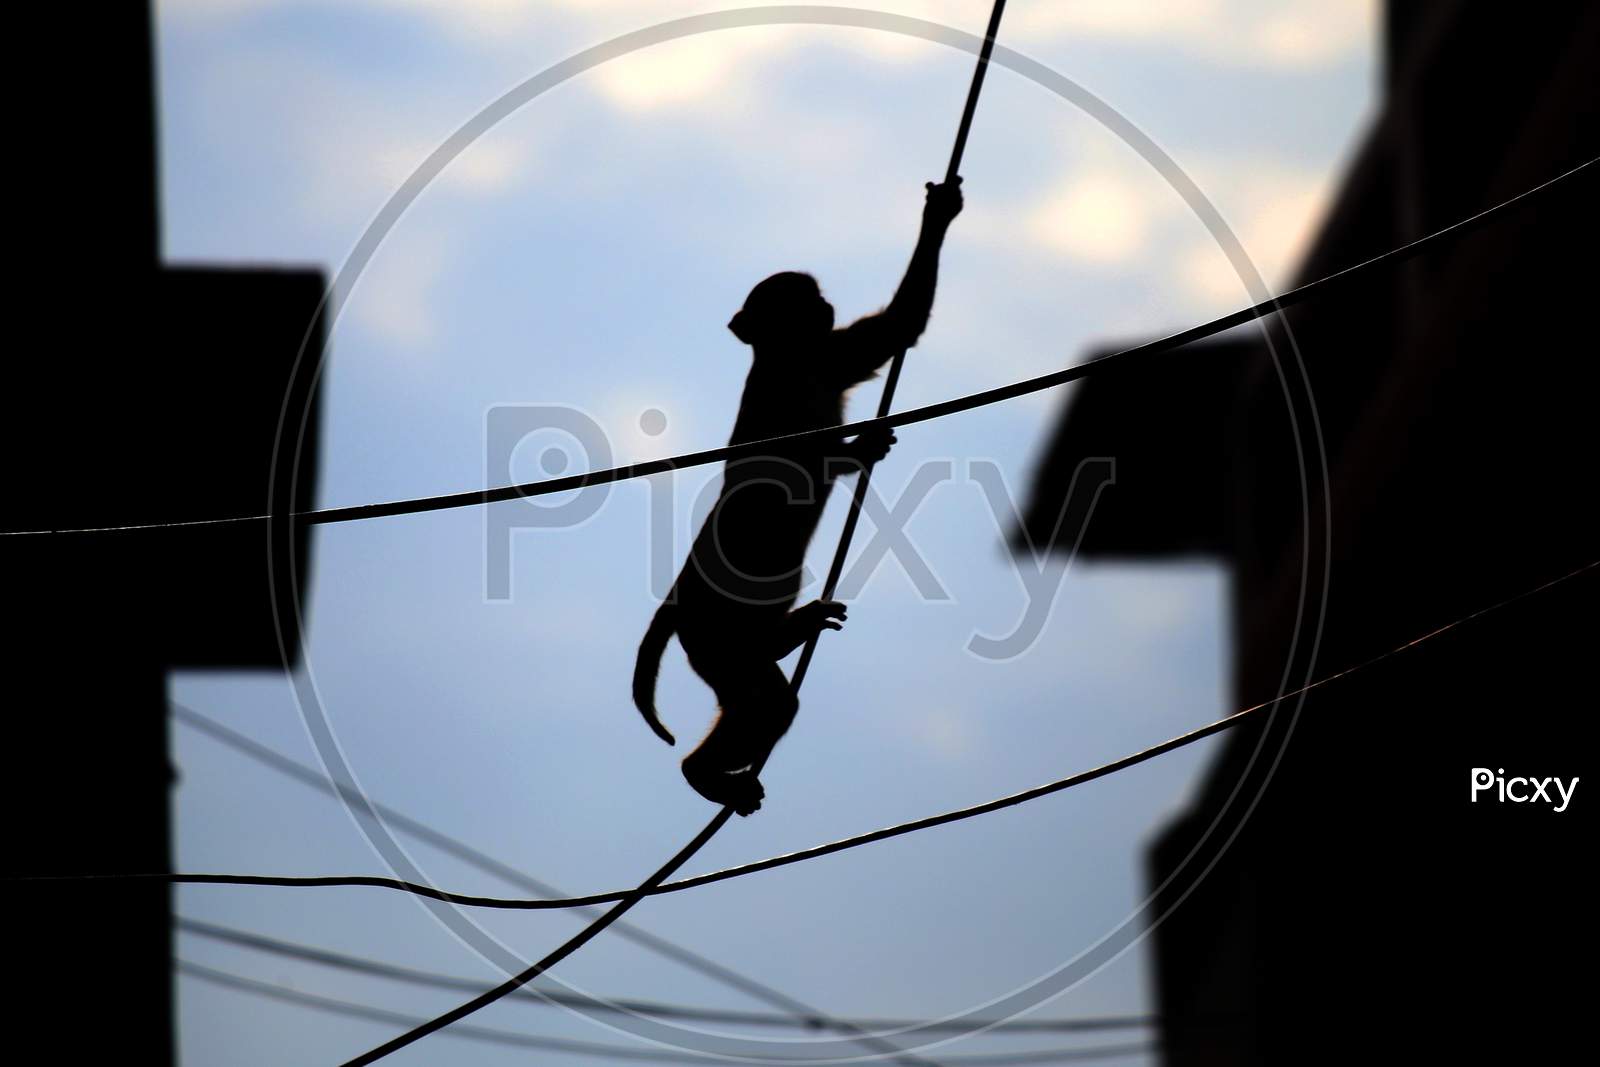 A Monkey Crosses A Street Using Over-Head Power Lines In Ajmer, On August 1, 2020.